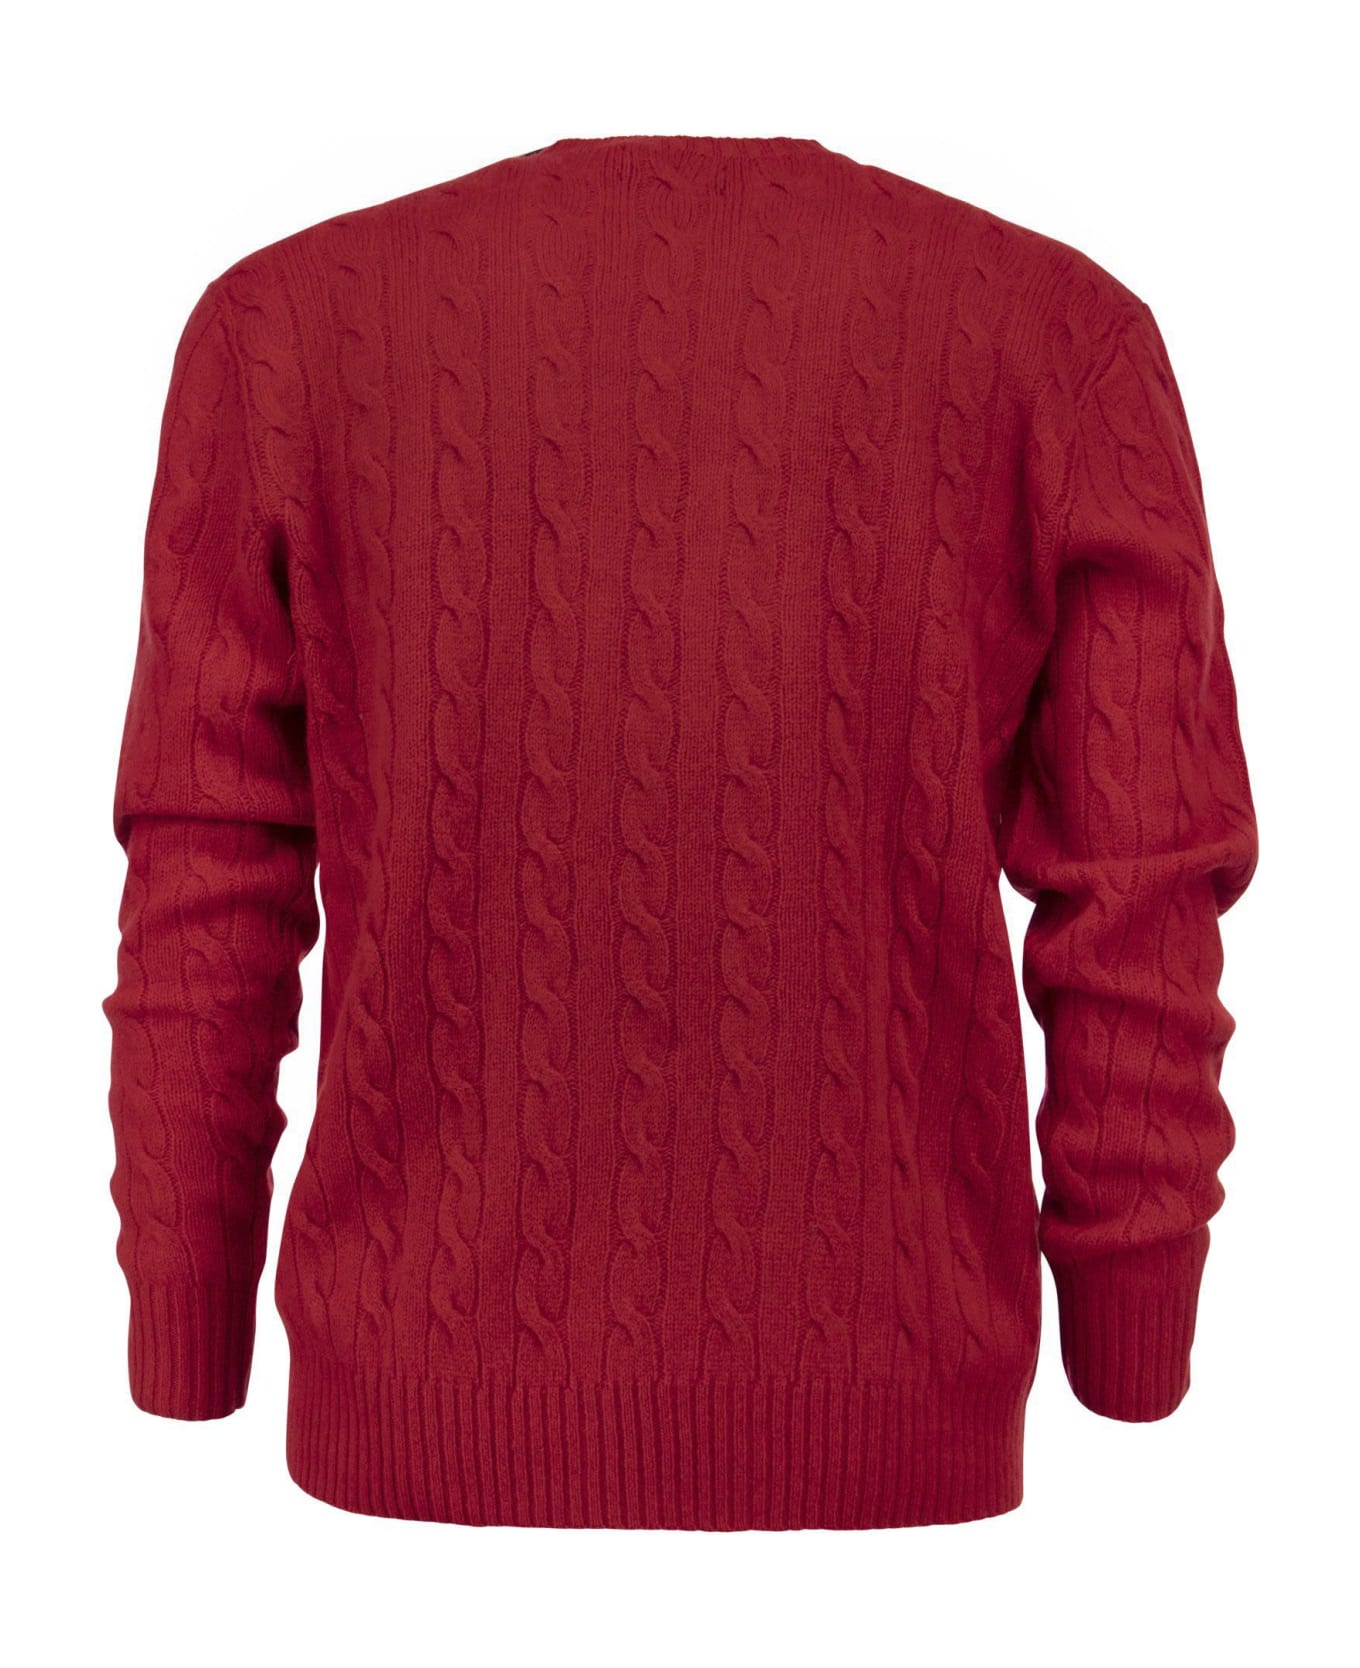 Polo Ralph Lauren Wool And Cashmere Cable-knit Sweater - Red